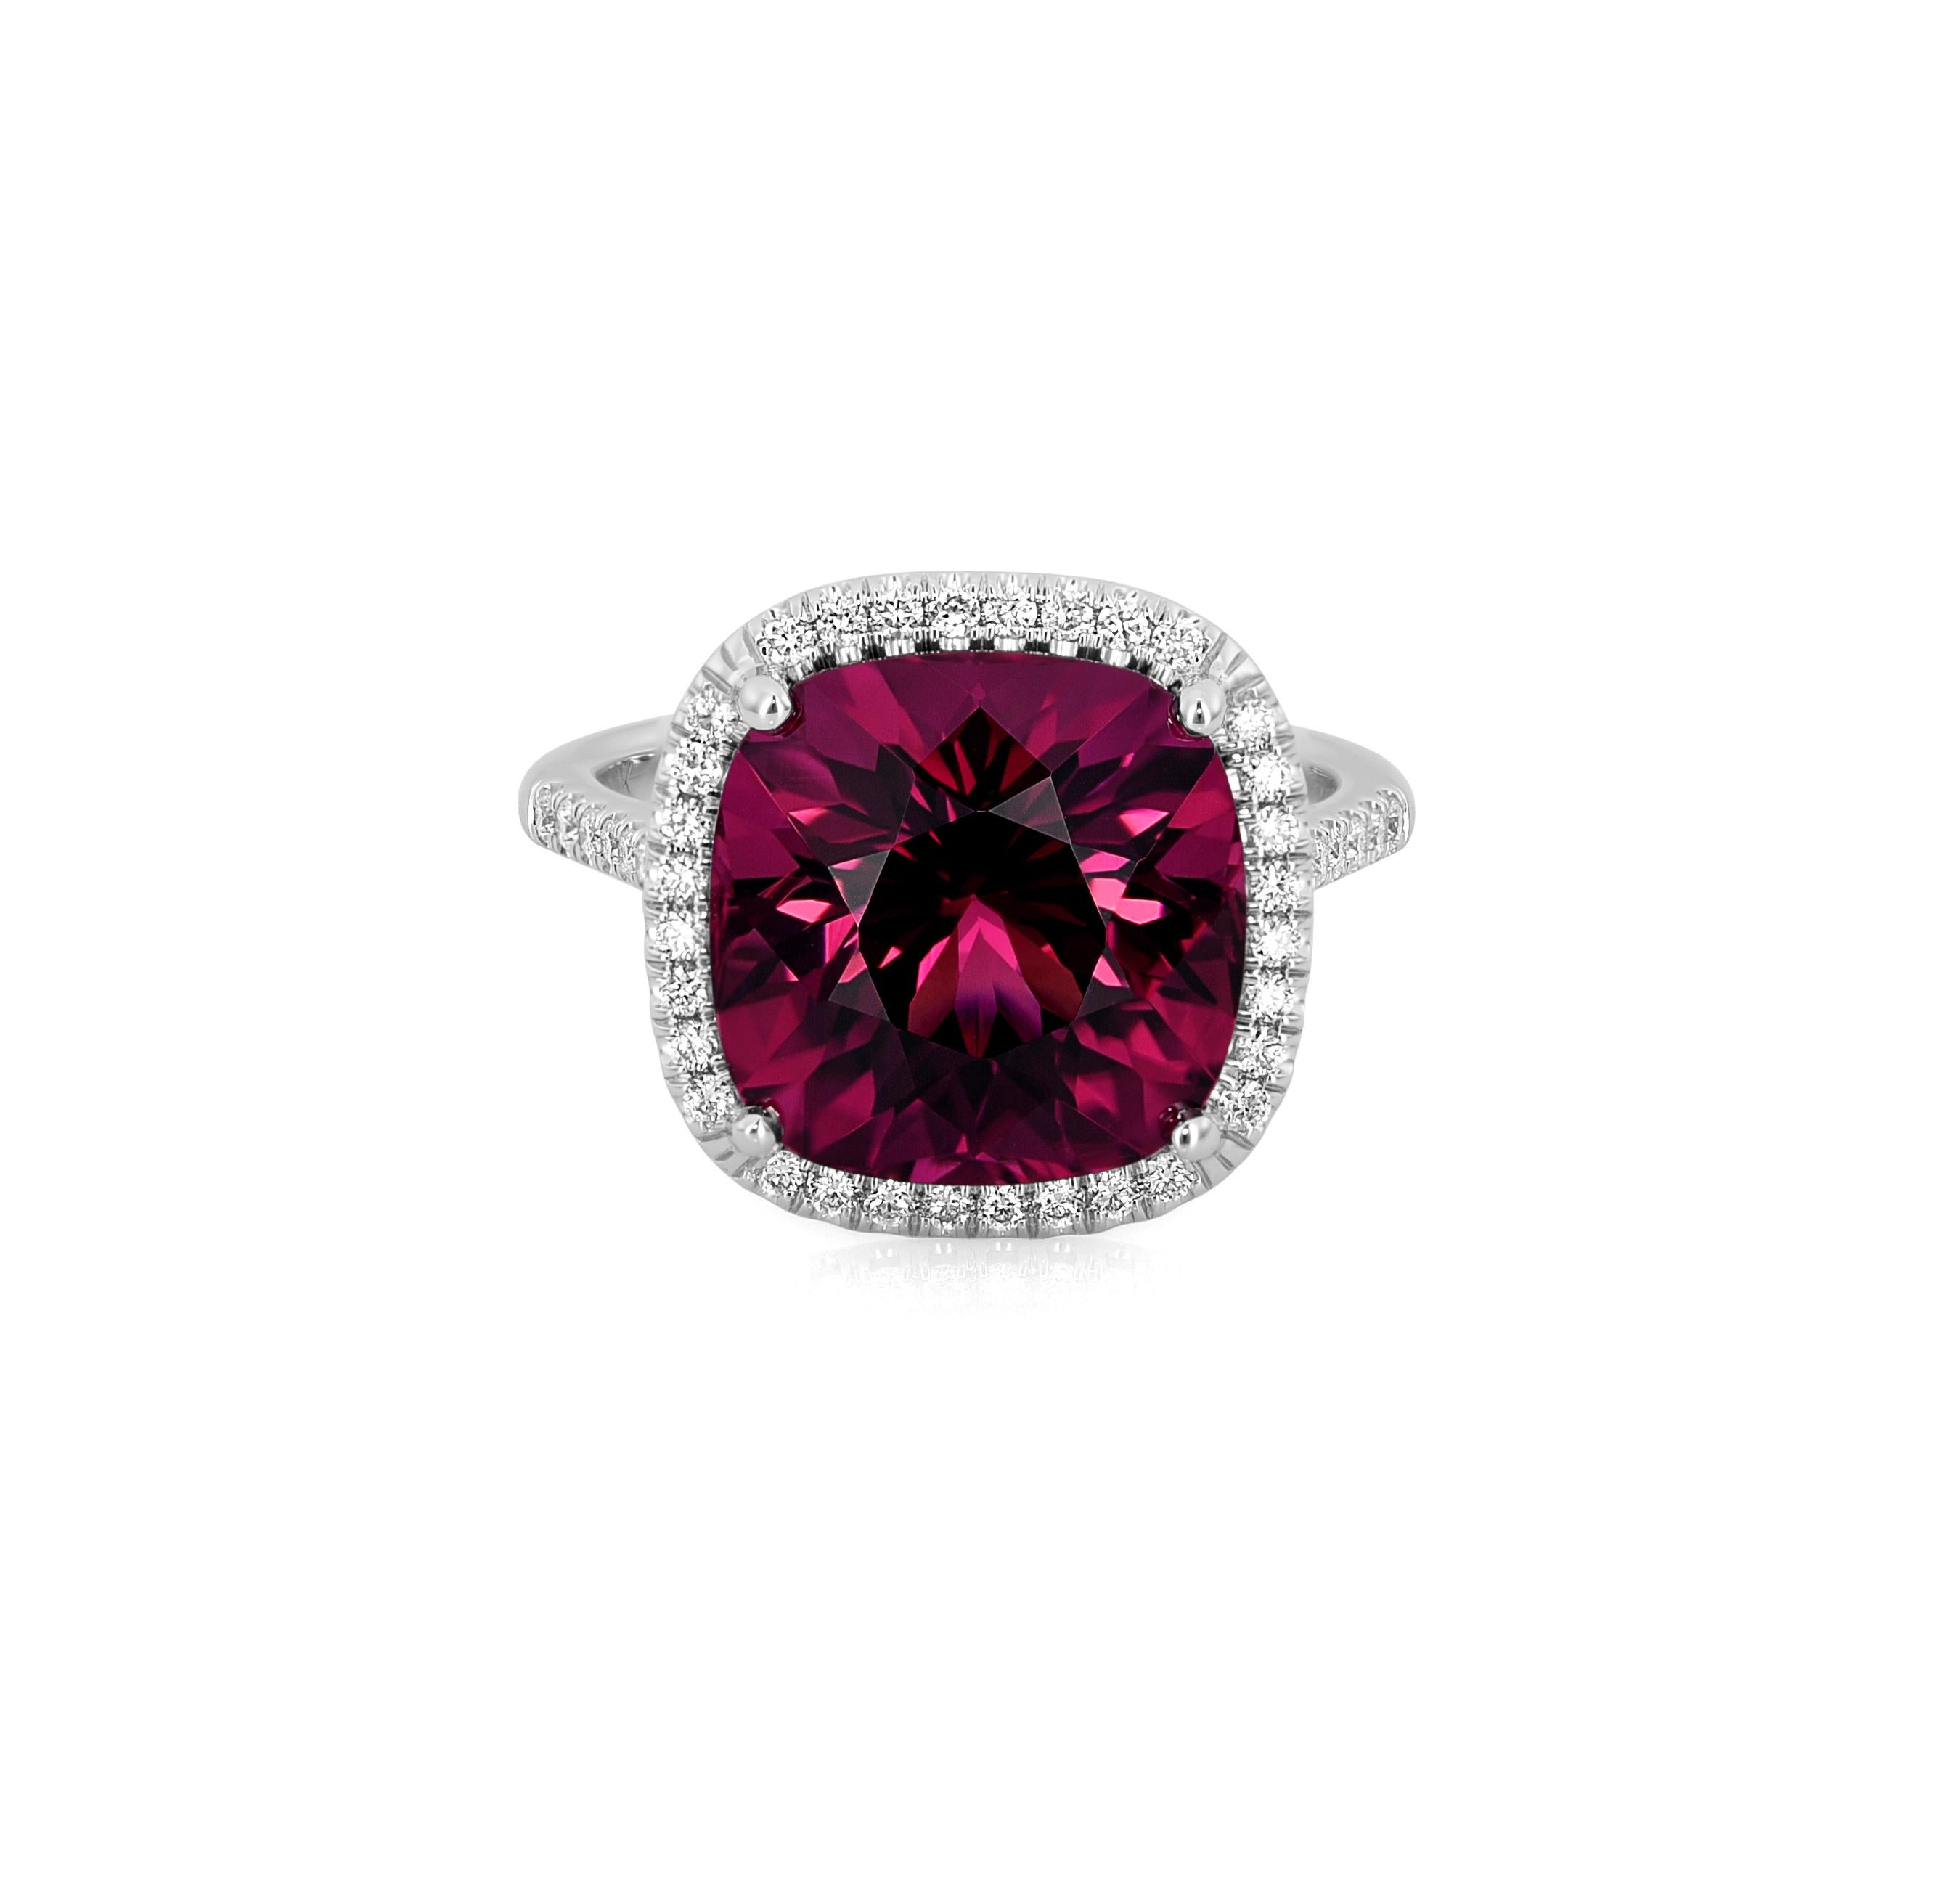 7.78 Carats Natural Red Tourmaline Diamonds set in 14K White Gold Rings Neuf à Los Angeles, CA